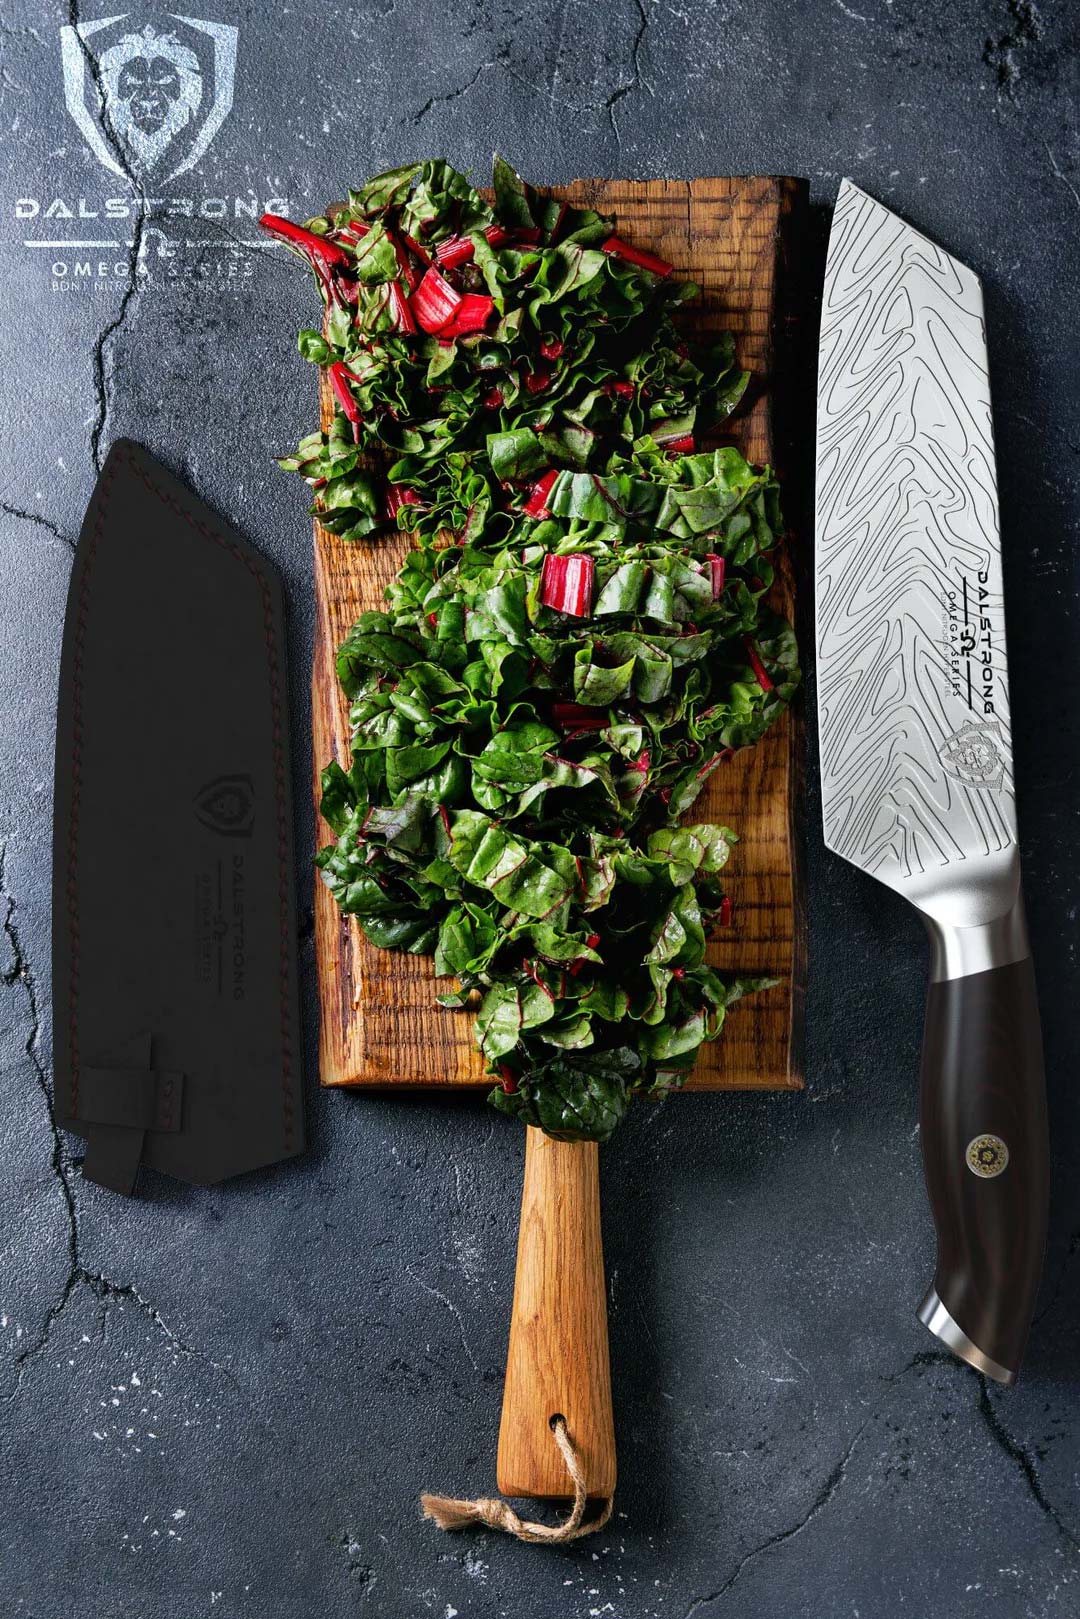 Dalstrong omega series 7 inch santoku knife with chopped herbs on a board.